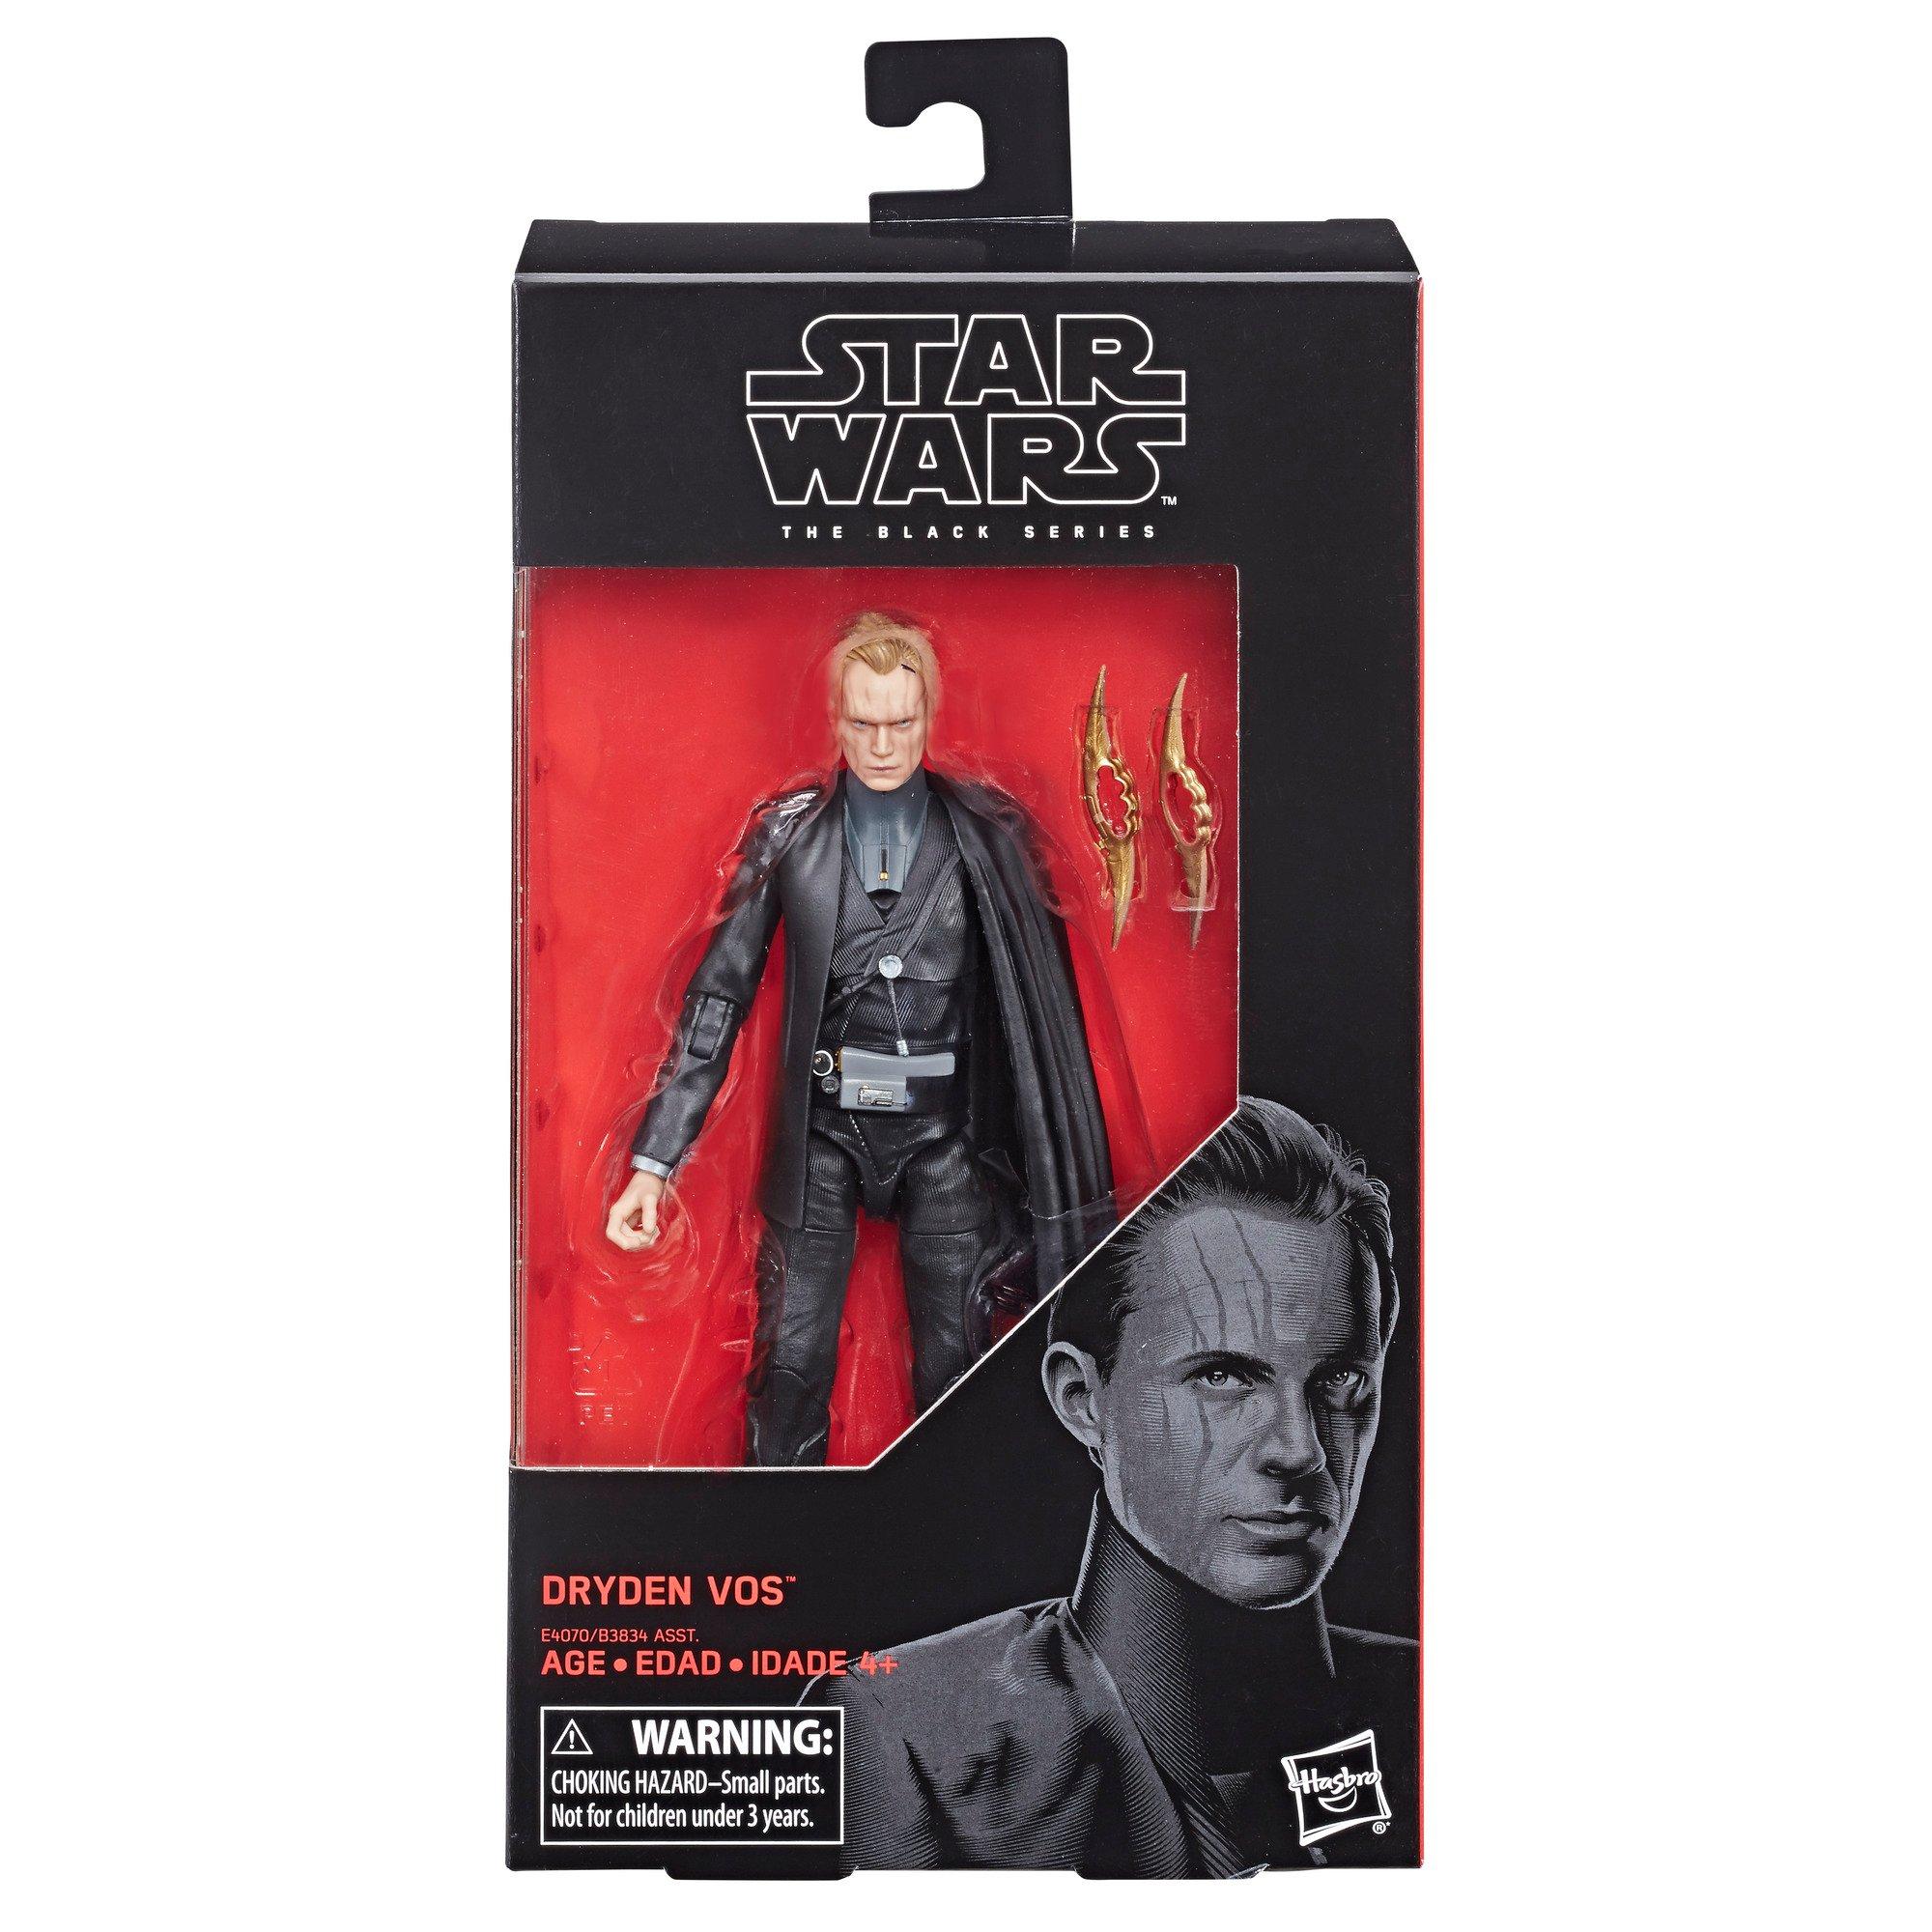 Hasbro Star Wars: The Black Series Dryden Vos 6-in Action Figure